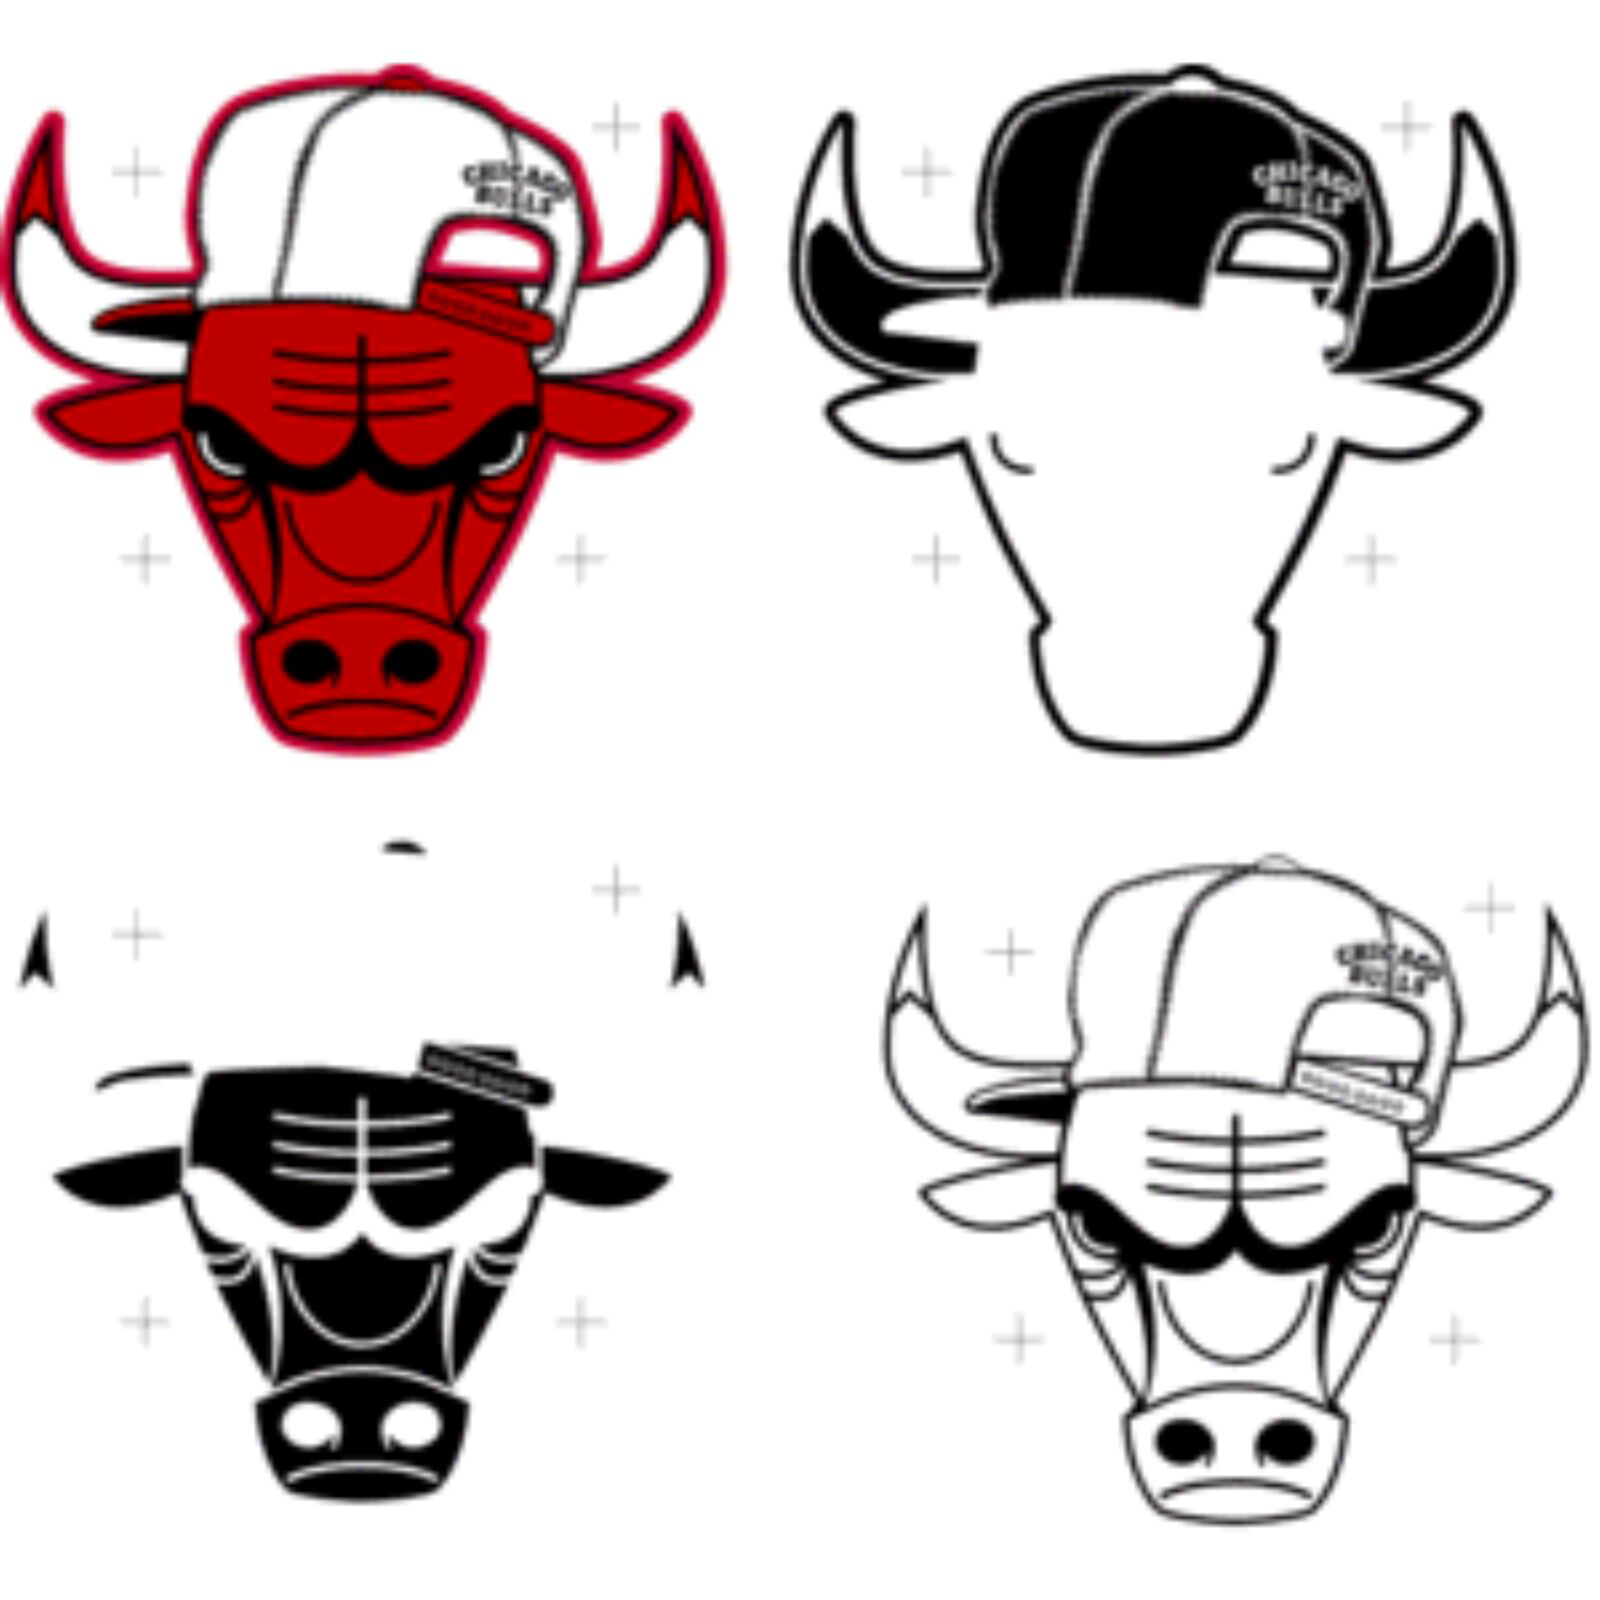 Chicago Bulls Sketch at Explore collection of